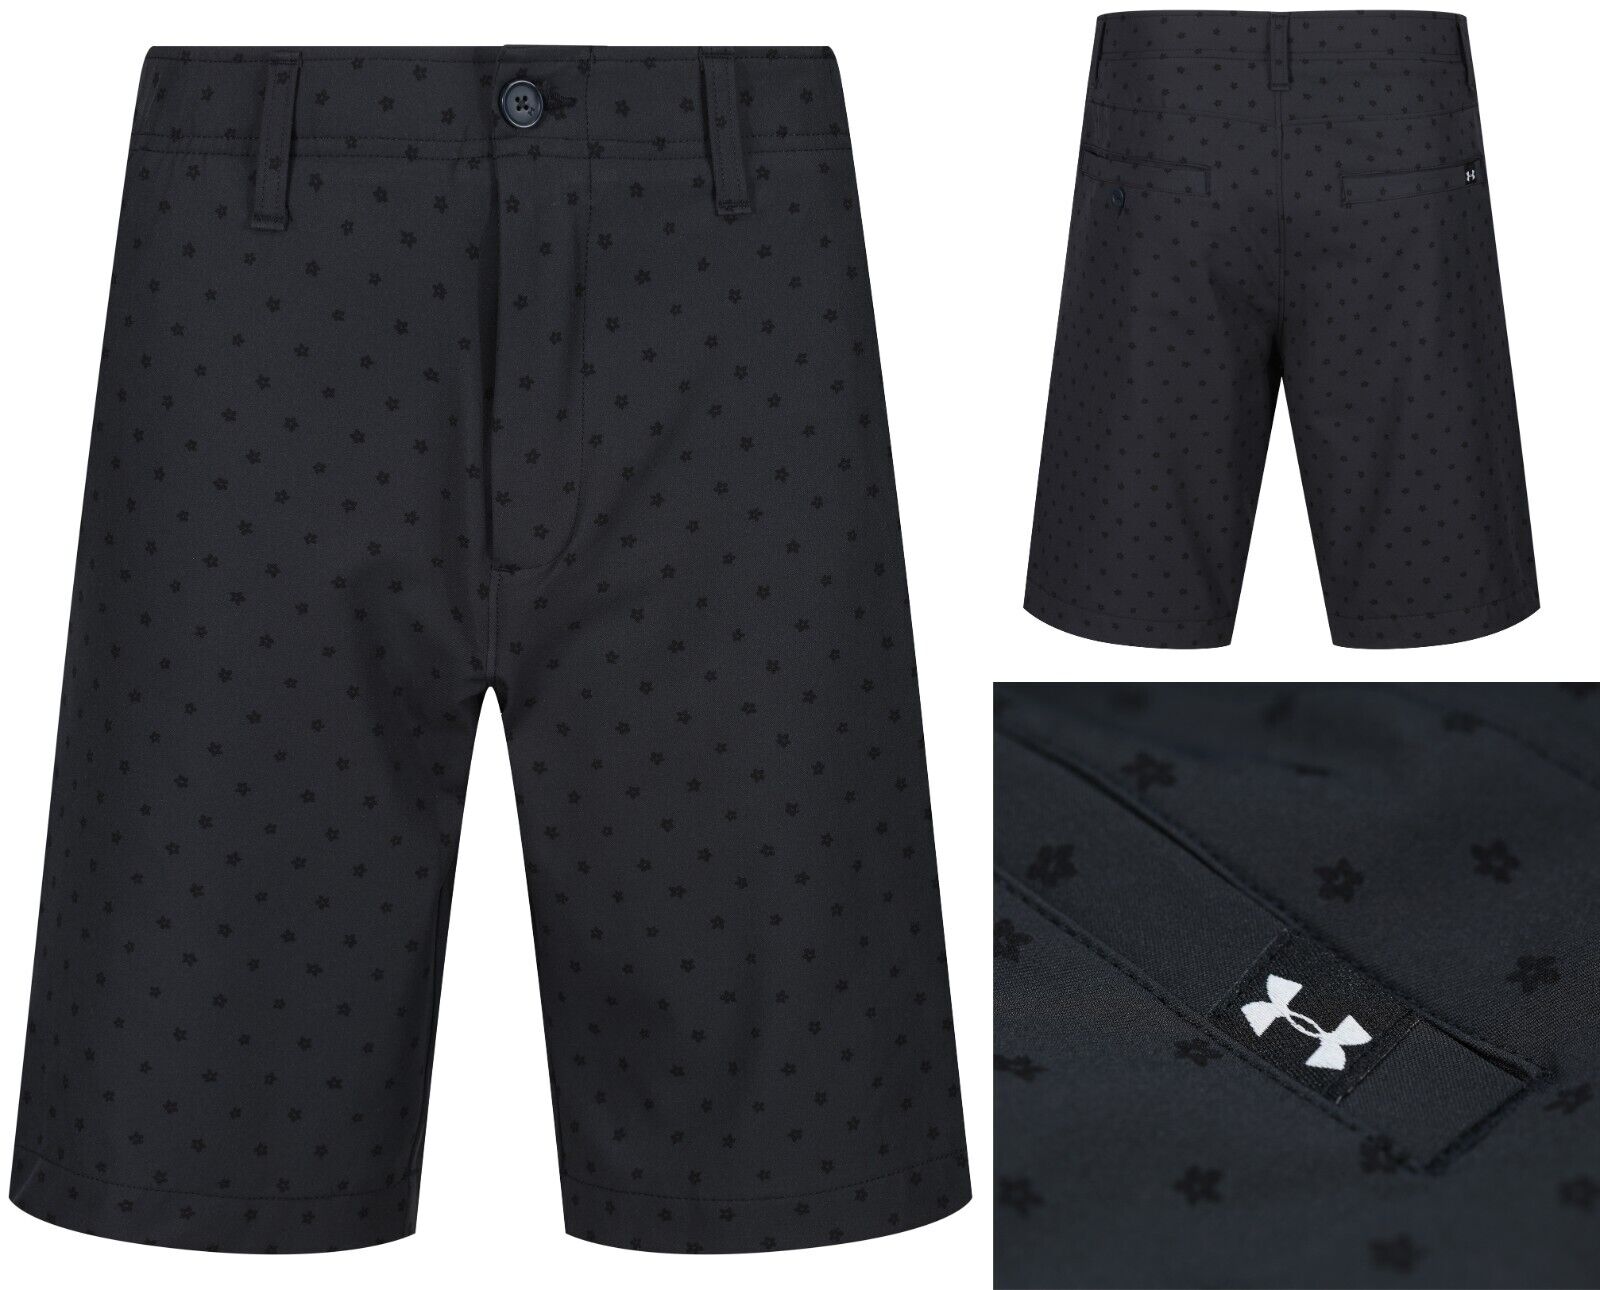 Under Armour Drive Printed Graphic Golf Shorts - 10 Inseam